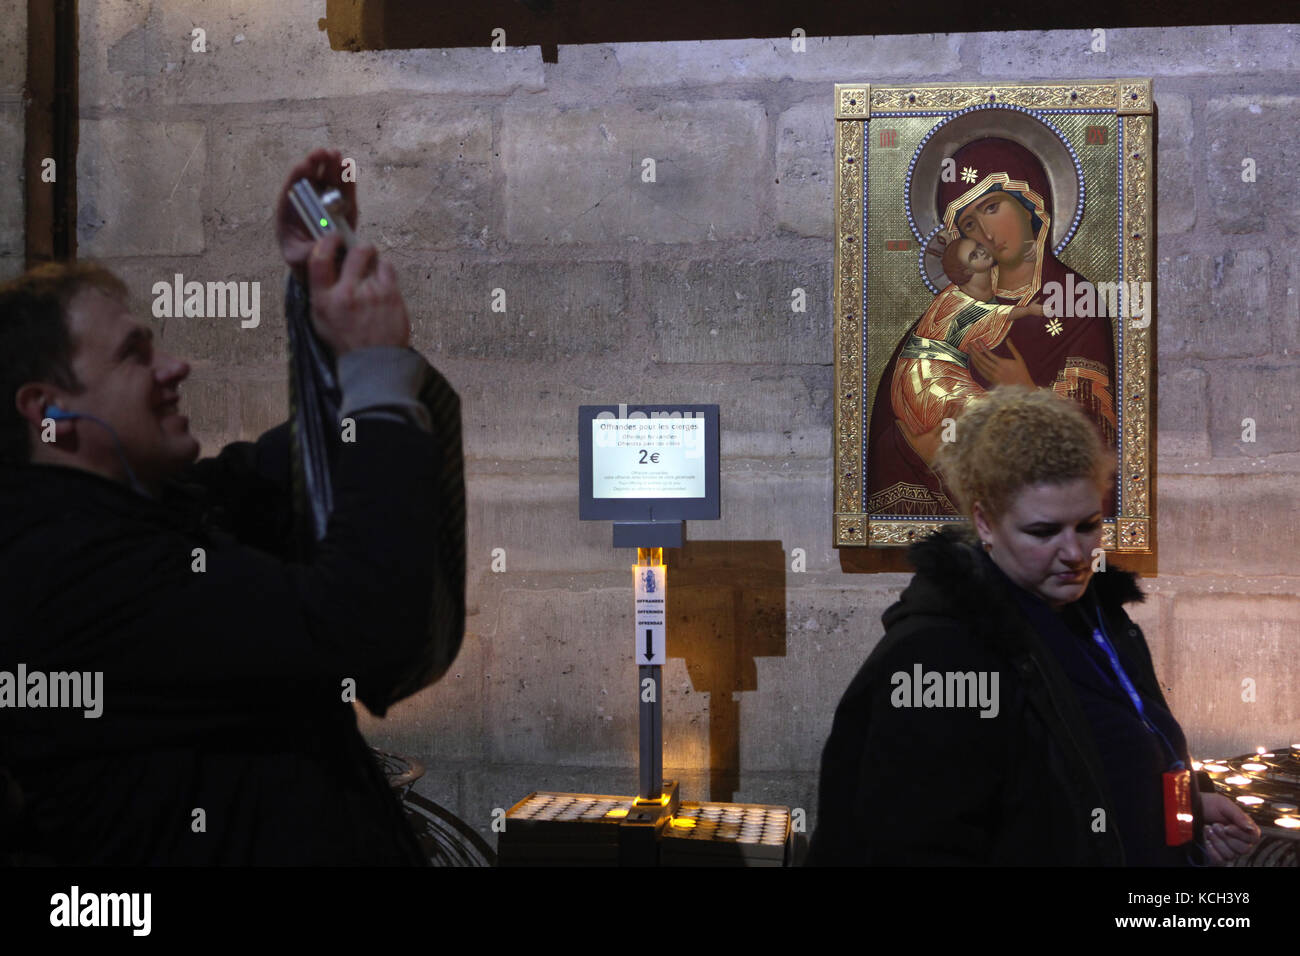 Visitors in front of the icon of the Theotokos of Vladimir in the Notre-Dame Cathedral (Notre-Dame de Paris) in Paris, France. The copy of the Byzantine icon regarded as the holy protectress of Russia was gifted to the Notre-Dame Cathedral by Patriarch Alexius II of Moscow, the primate of the Russian Orthodox Church. Stock Photo